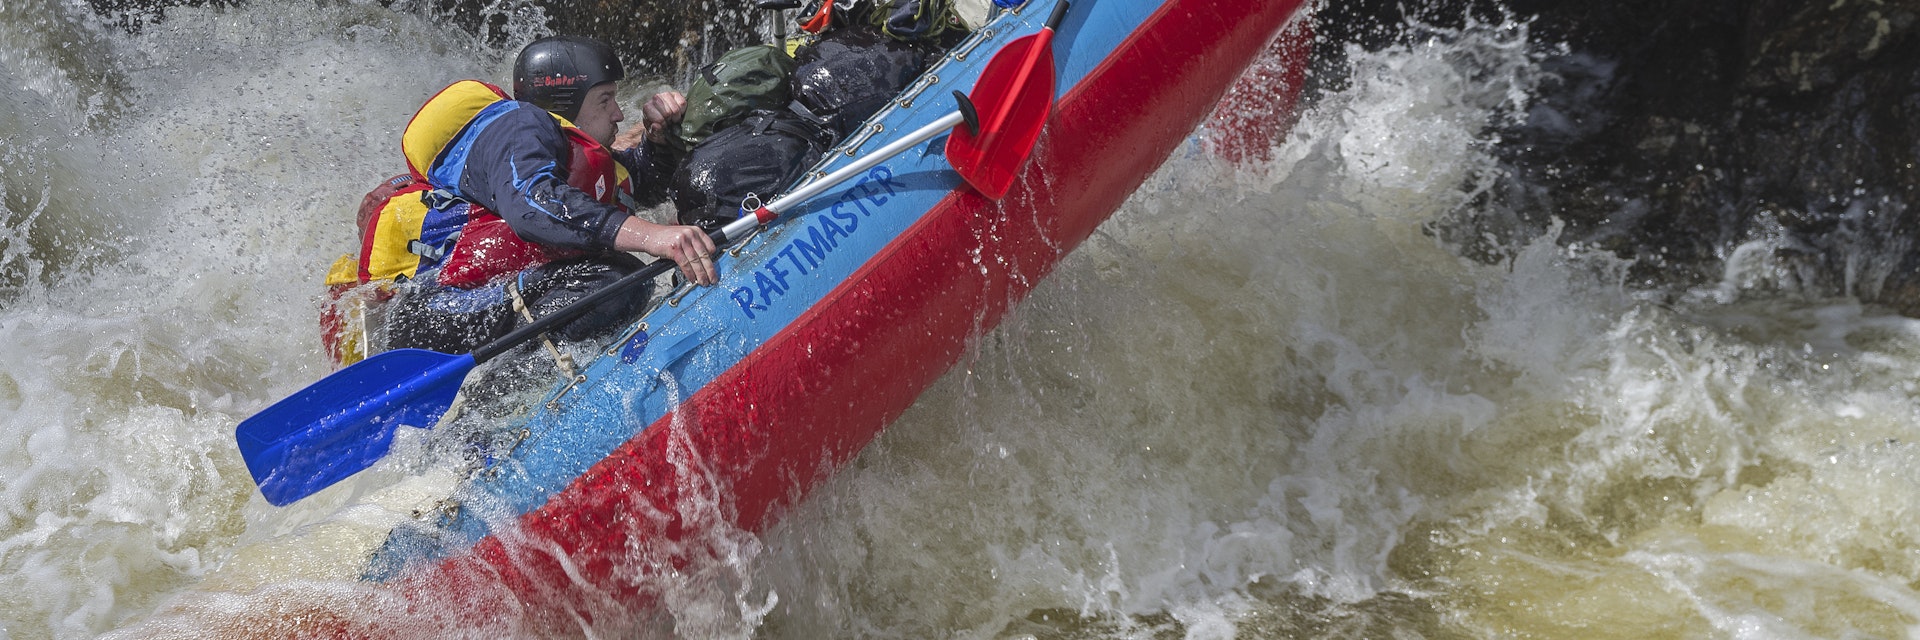 Vuosnayoki River, Murmansk Region, Russia - June 9, 2015: People on sport catamaran in hard and dangerous situation when  overcoming a difficult rarids on Vuosnayoki river, the border of the Murmansk region and Karelia, Russia.